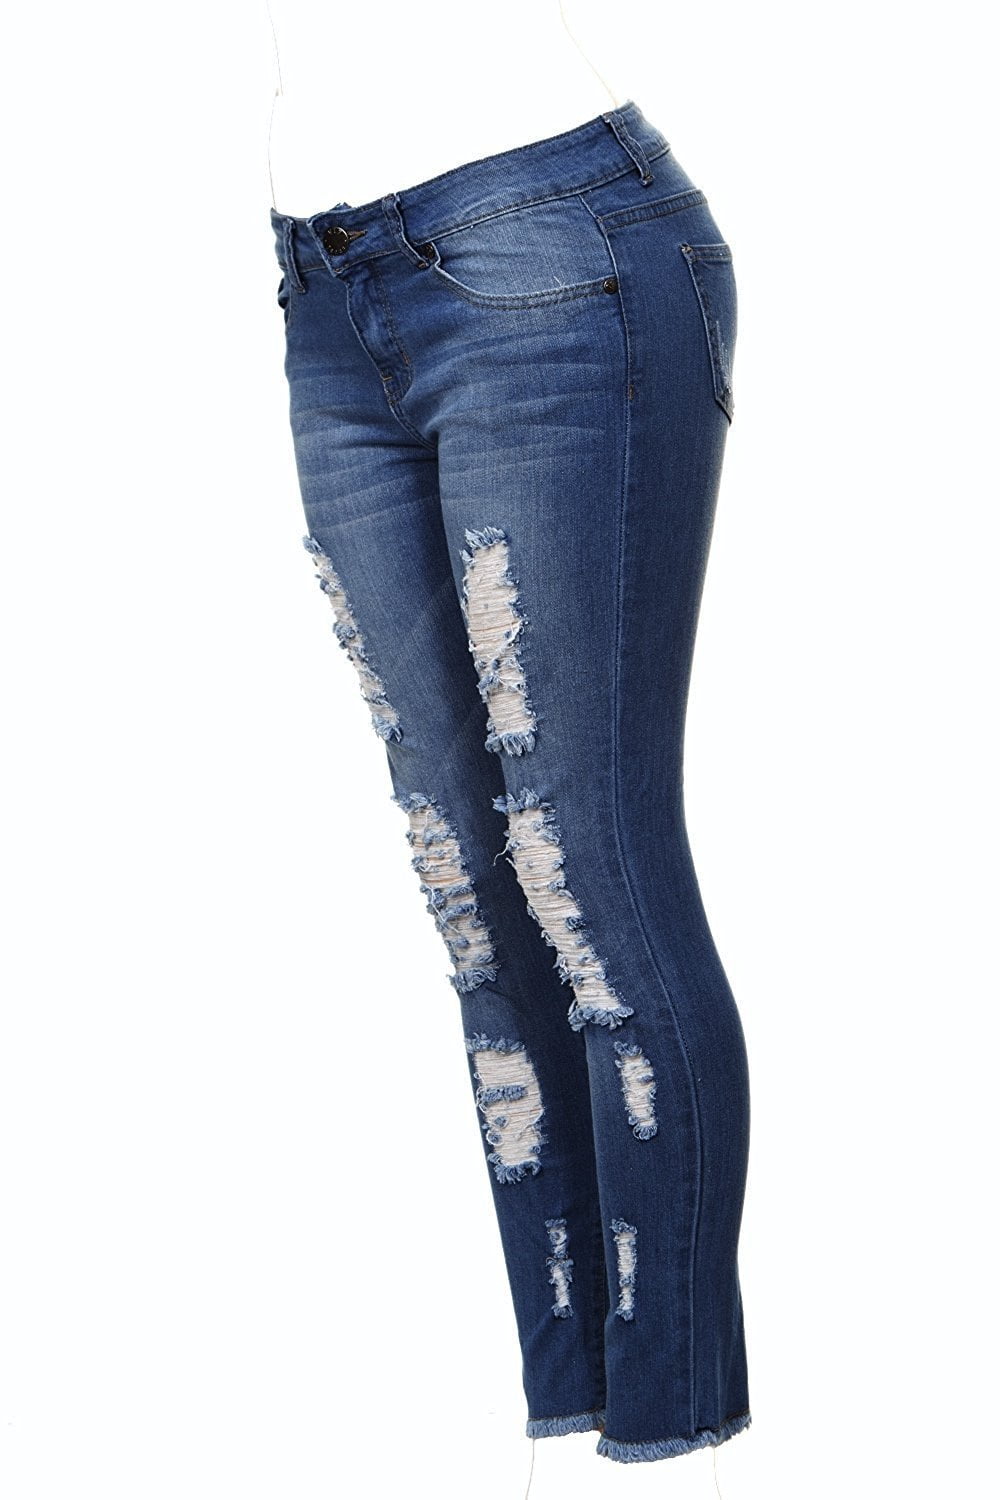 VIP Jeans for Women Cute Juniors Ripped 